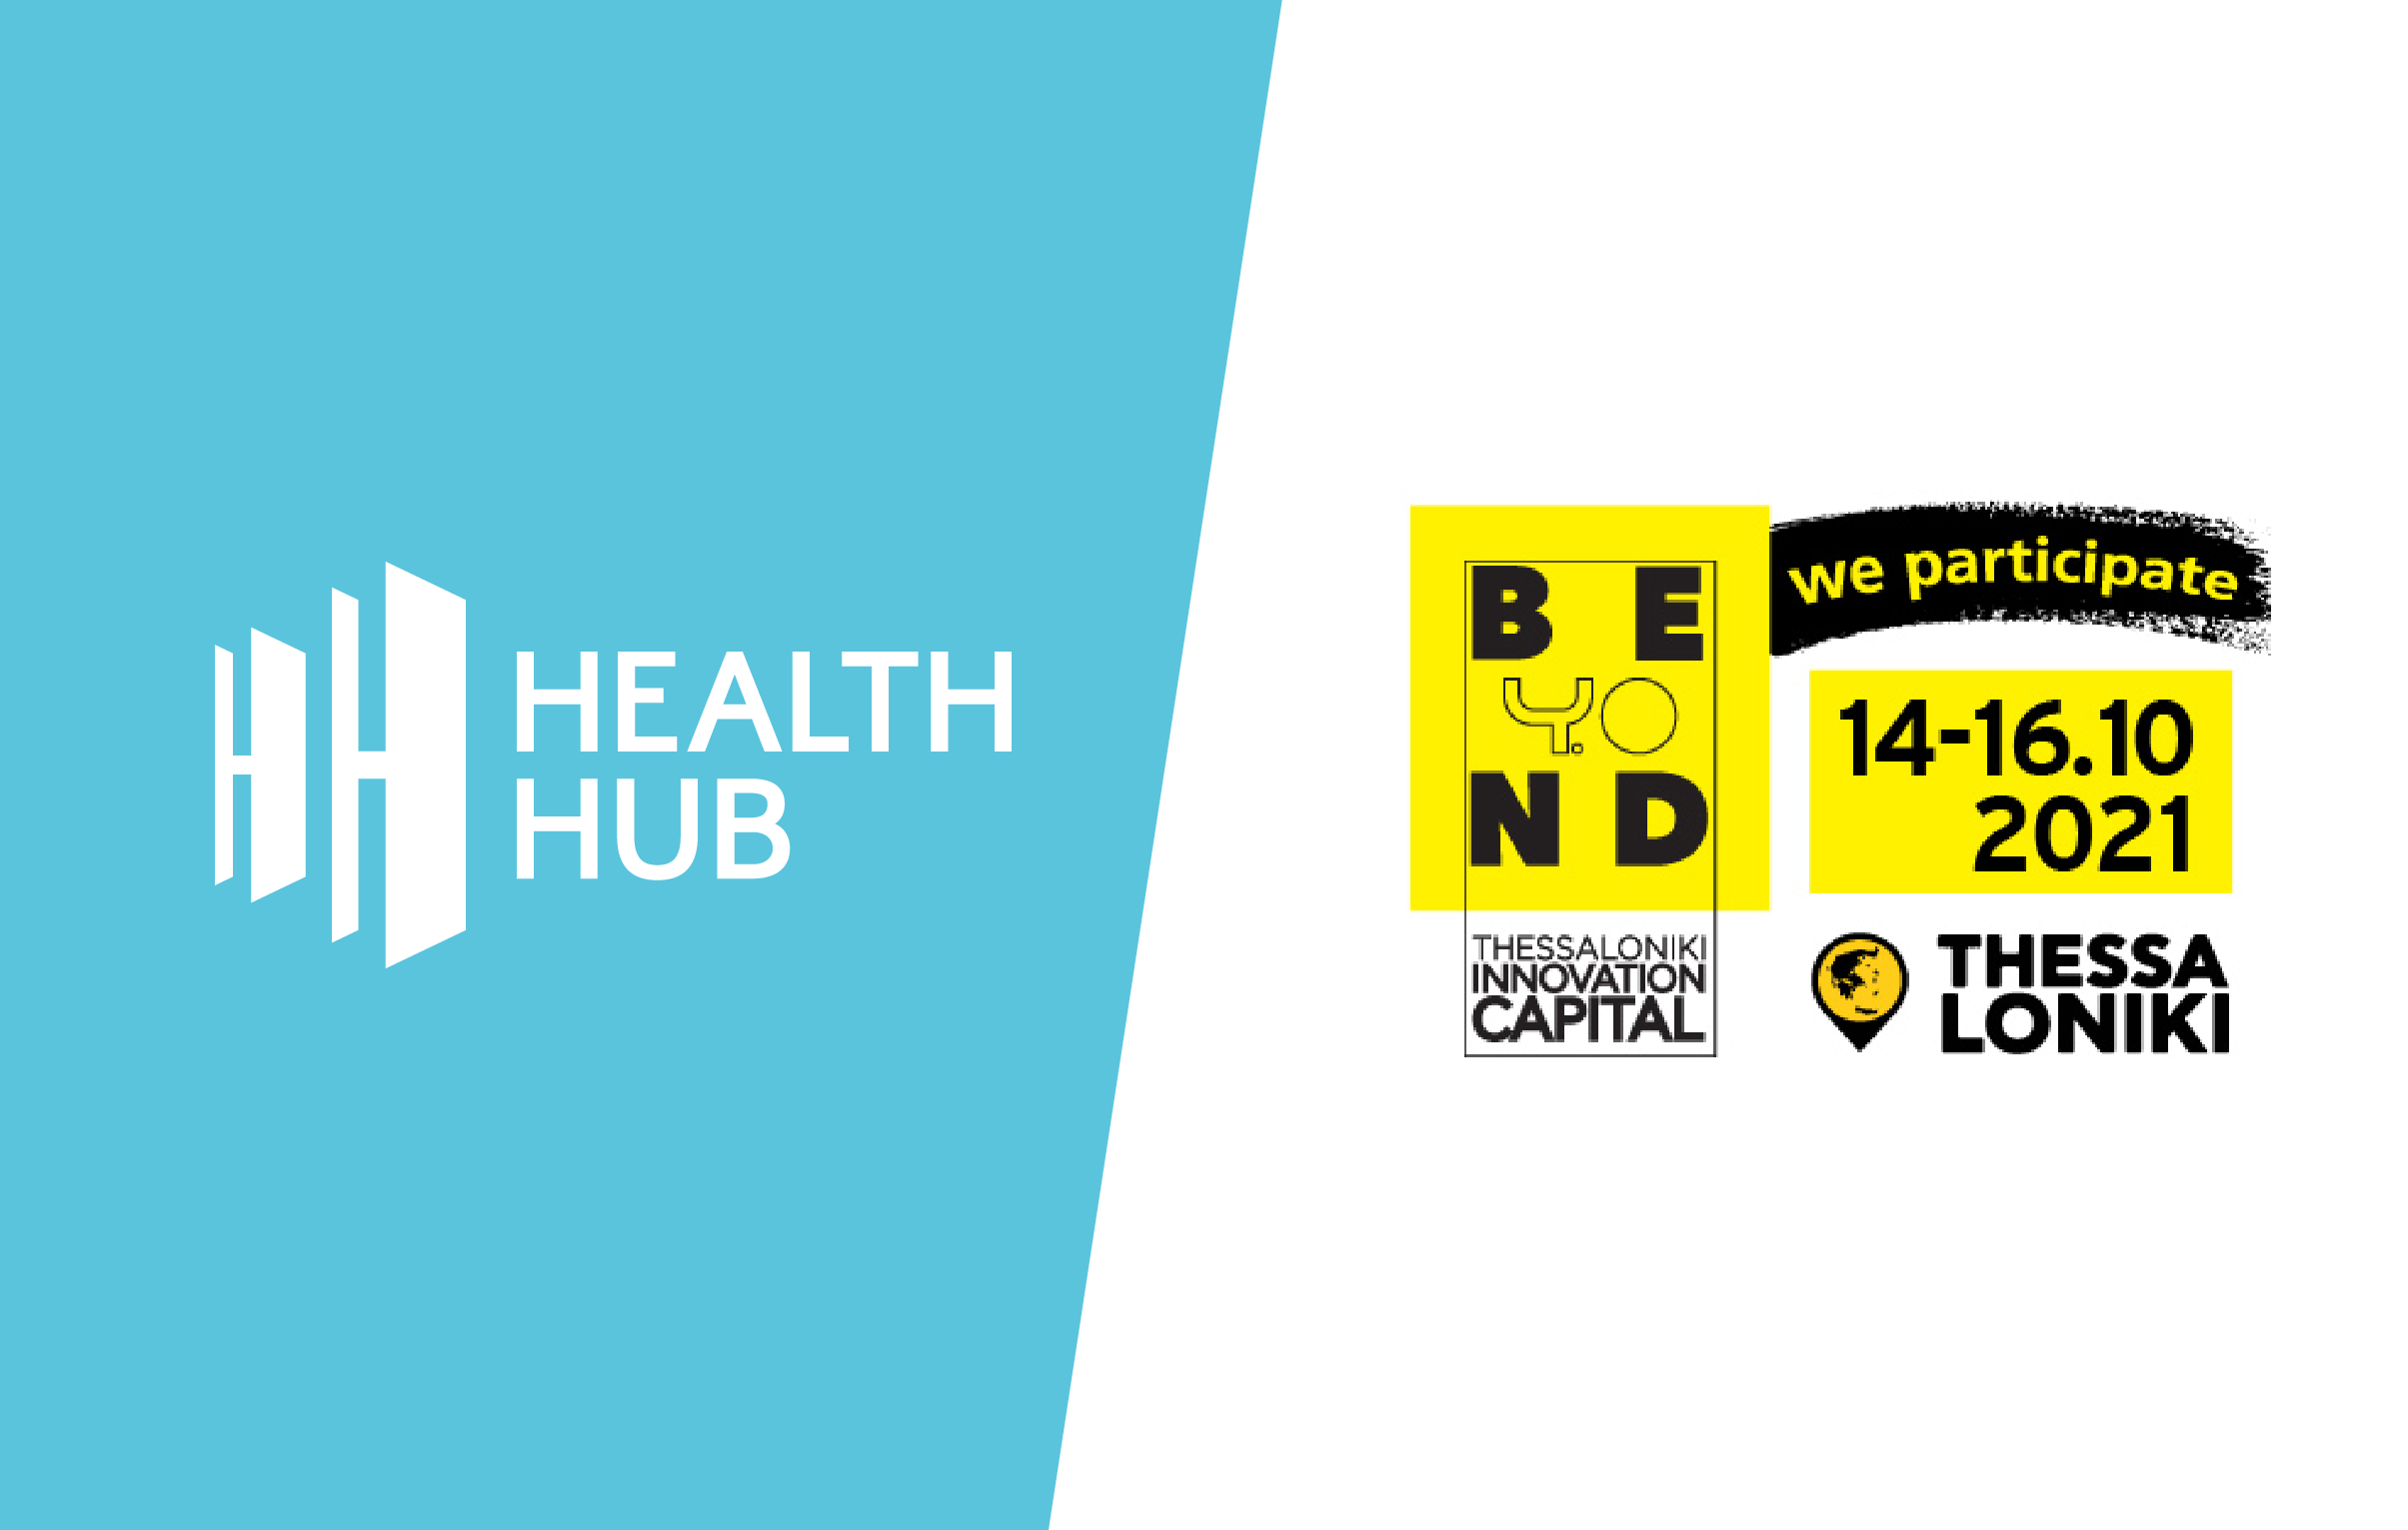 Health Hub in Beyond 4.0: An Exhibition to Unlock the Future